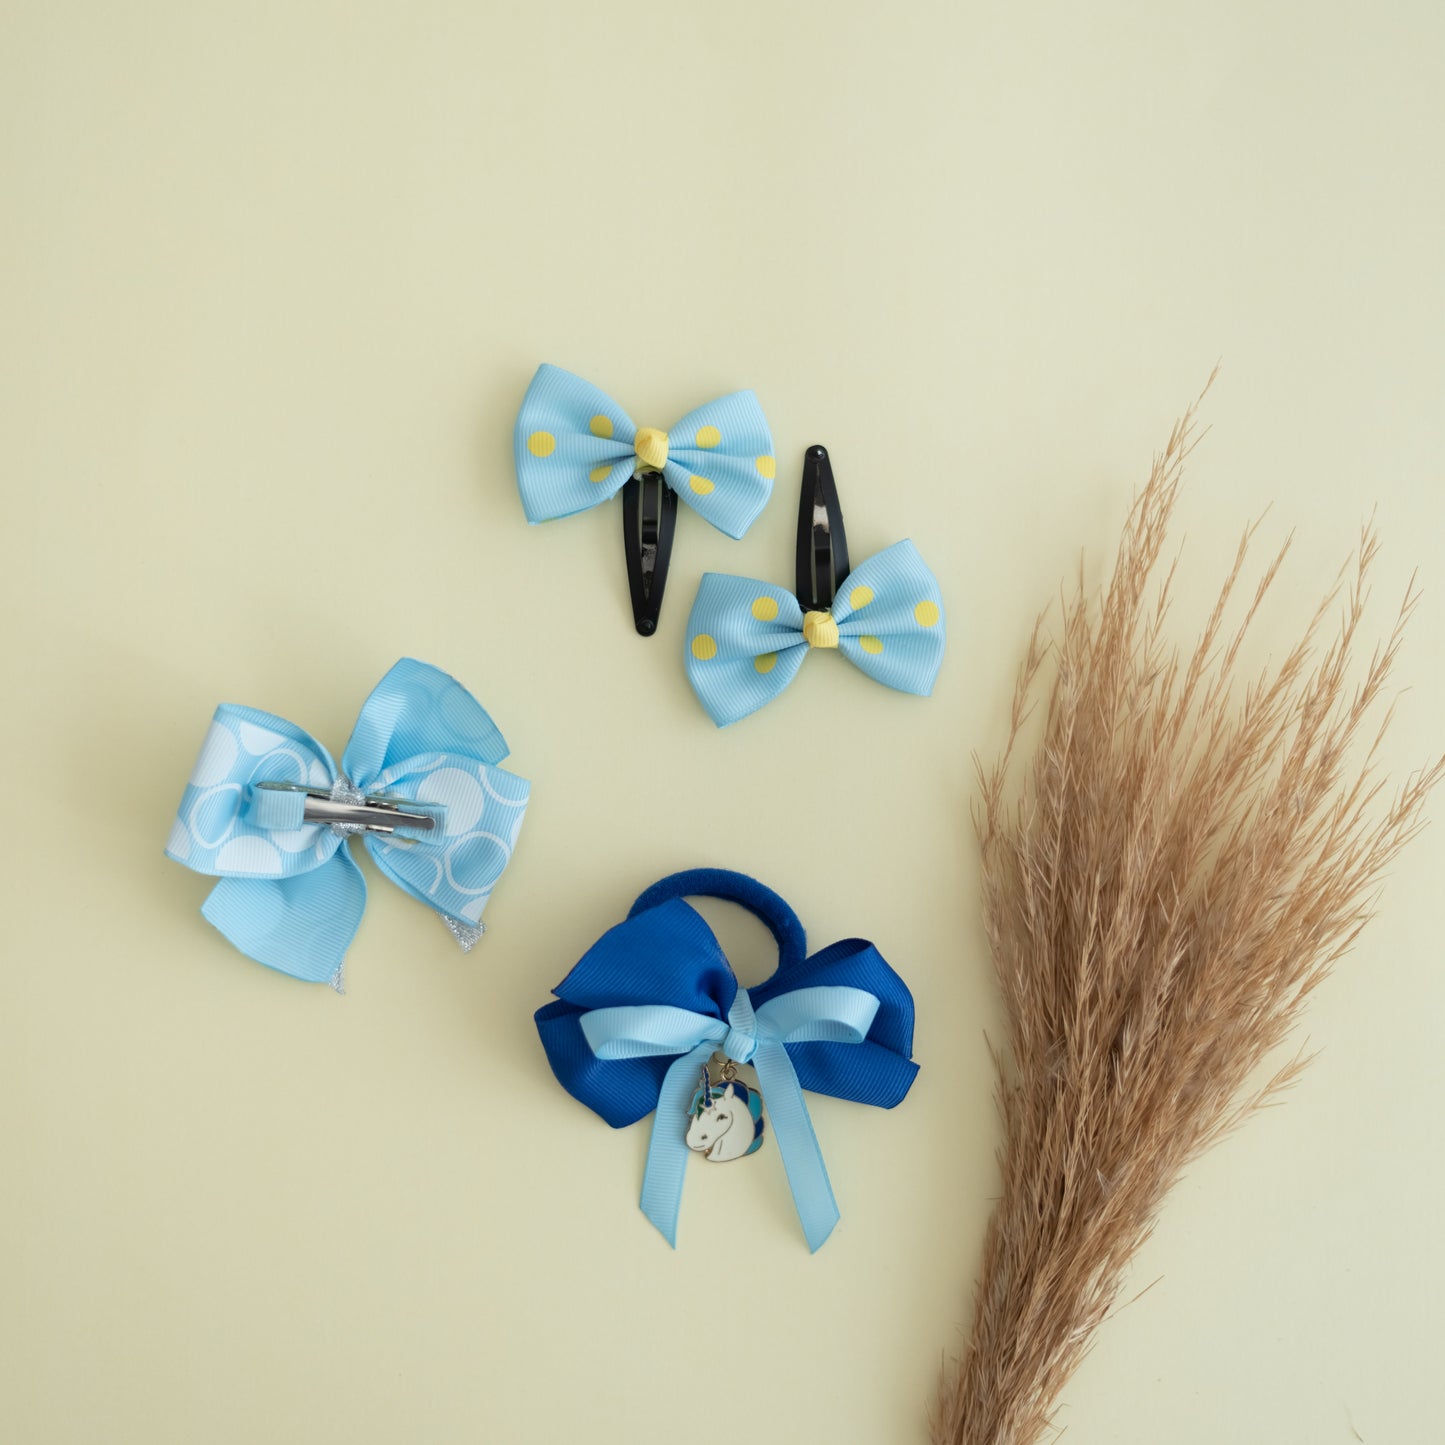 Cute double bow rubberband with unicorncharm, silver and blue double bow on  alligator clip and polka dot tic-tacs - Blue and Silver  (Set of 1 pair and 2 singles bow - 4 quantity)